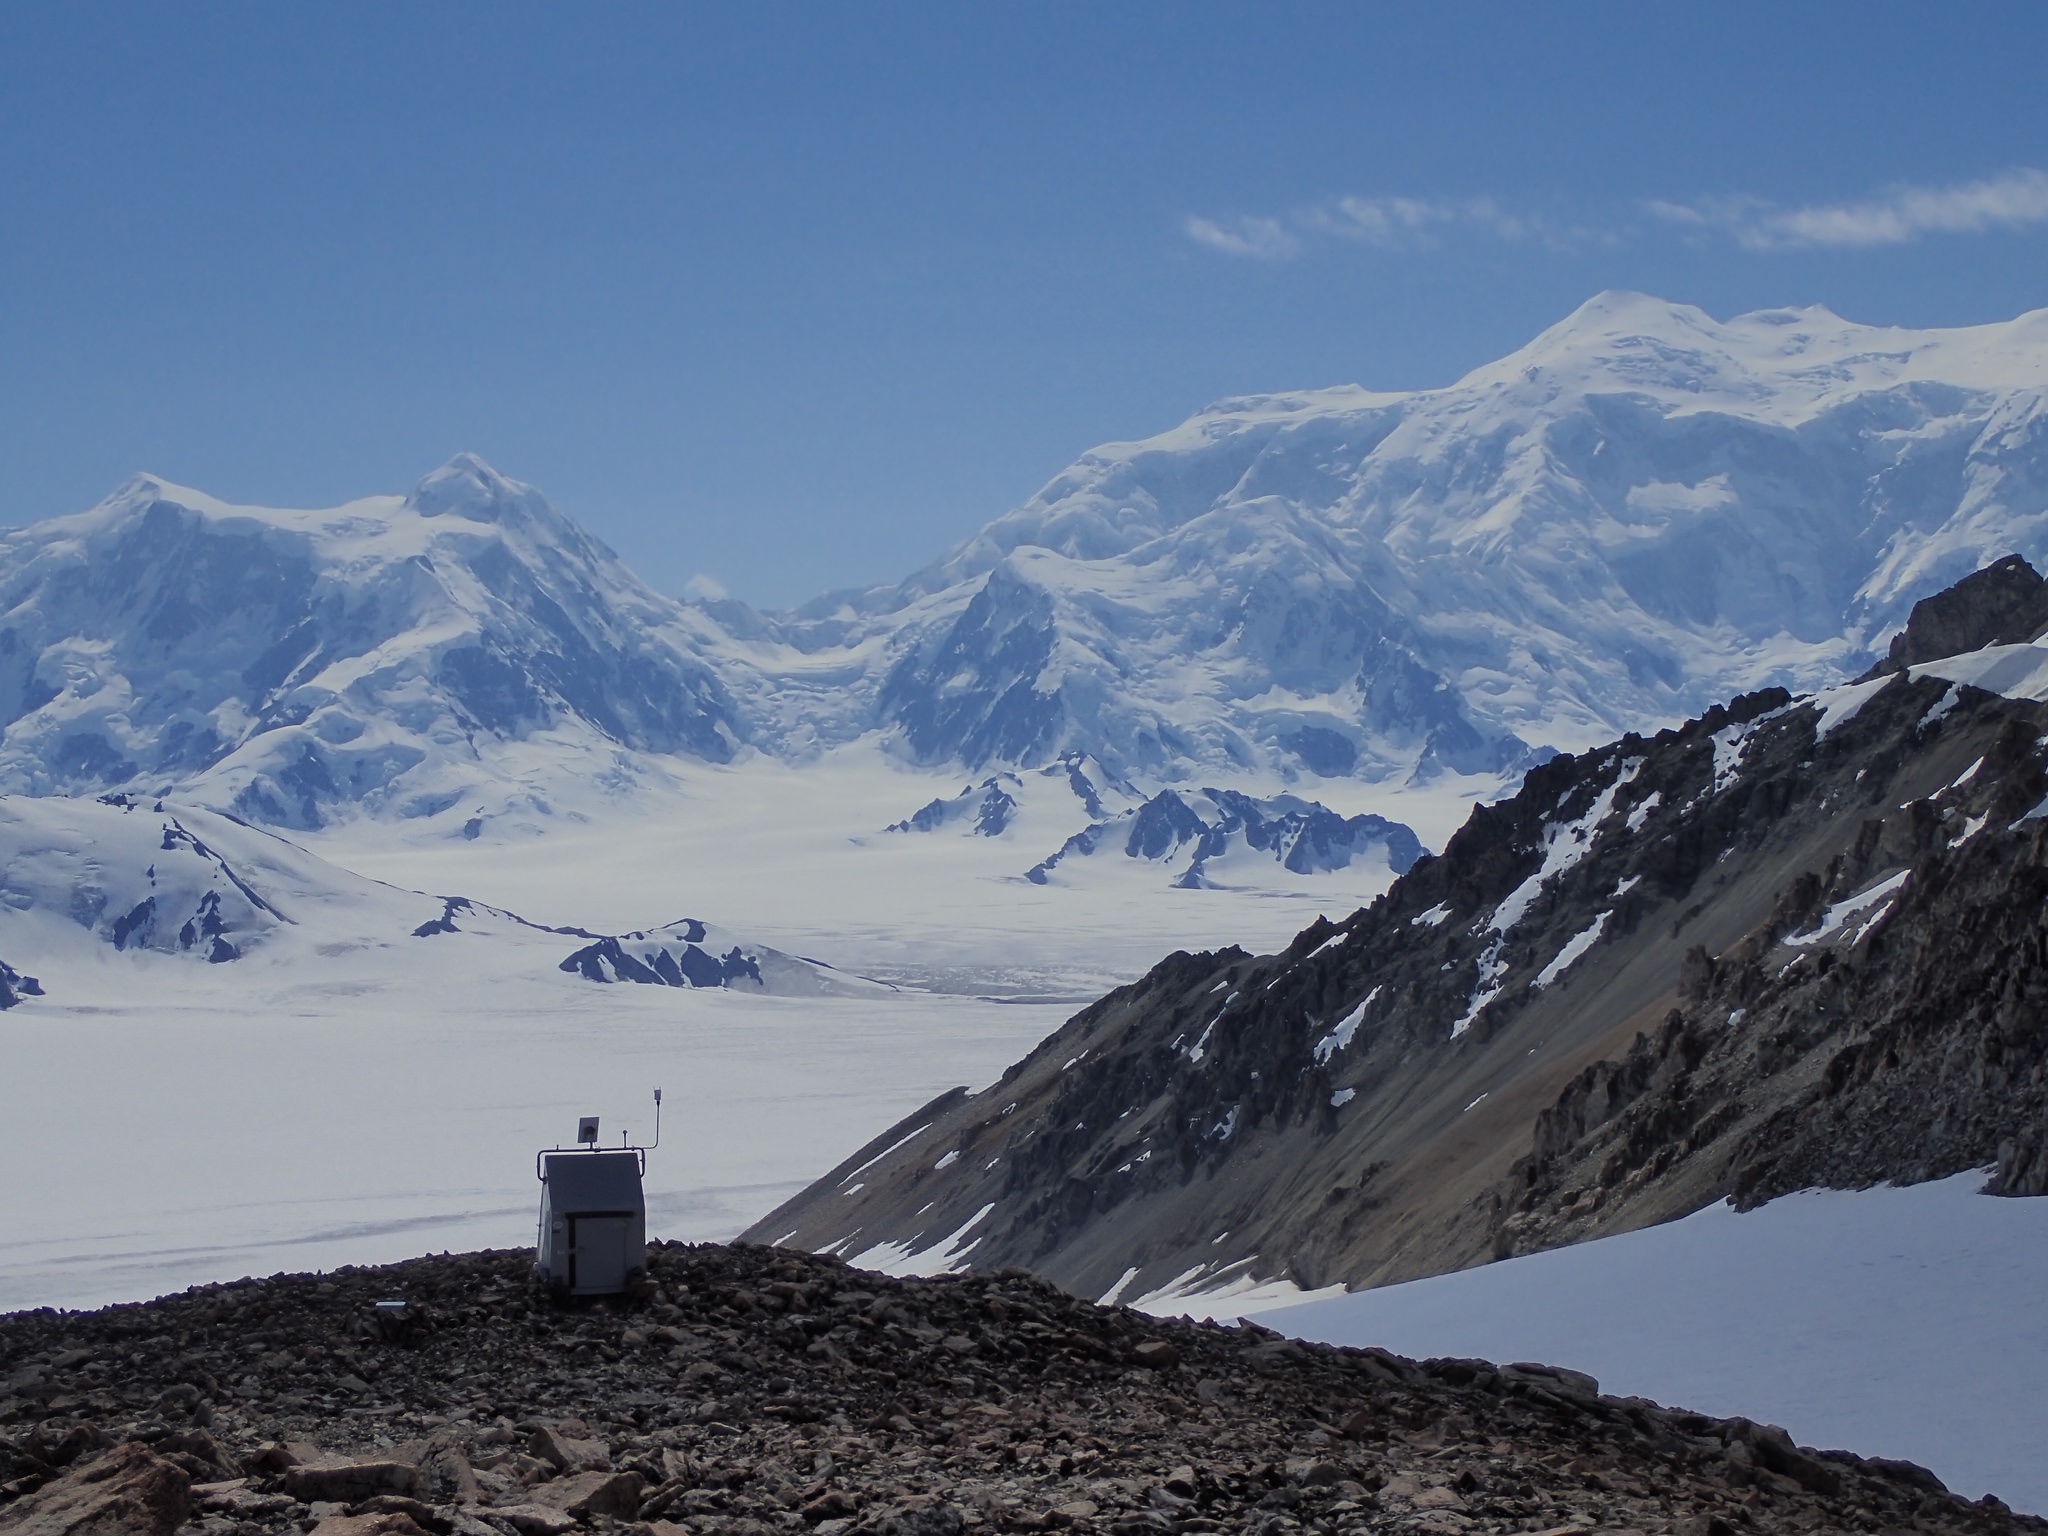 A seismic station sits on a rocky ridge with large ice- and snow-covered mountains in the distance on a sunny day.